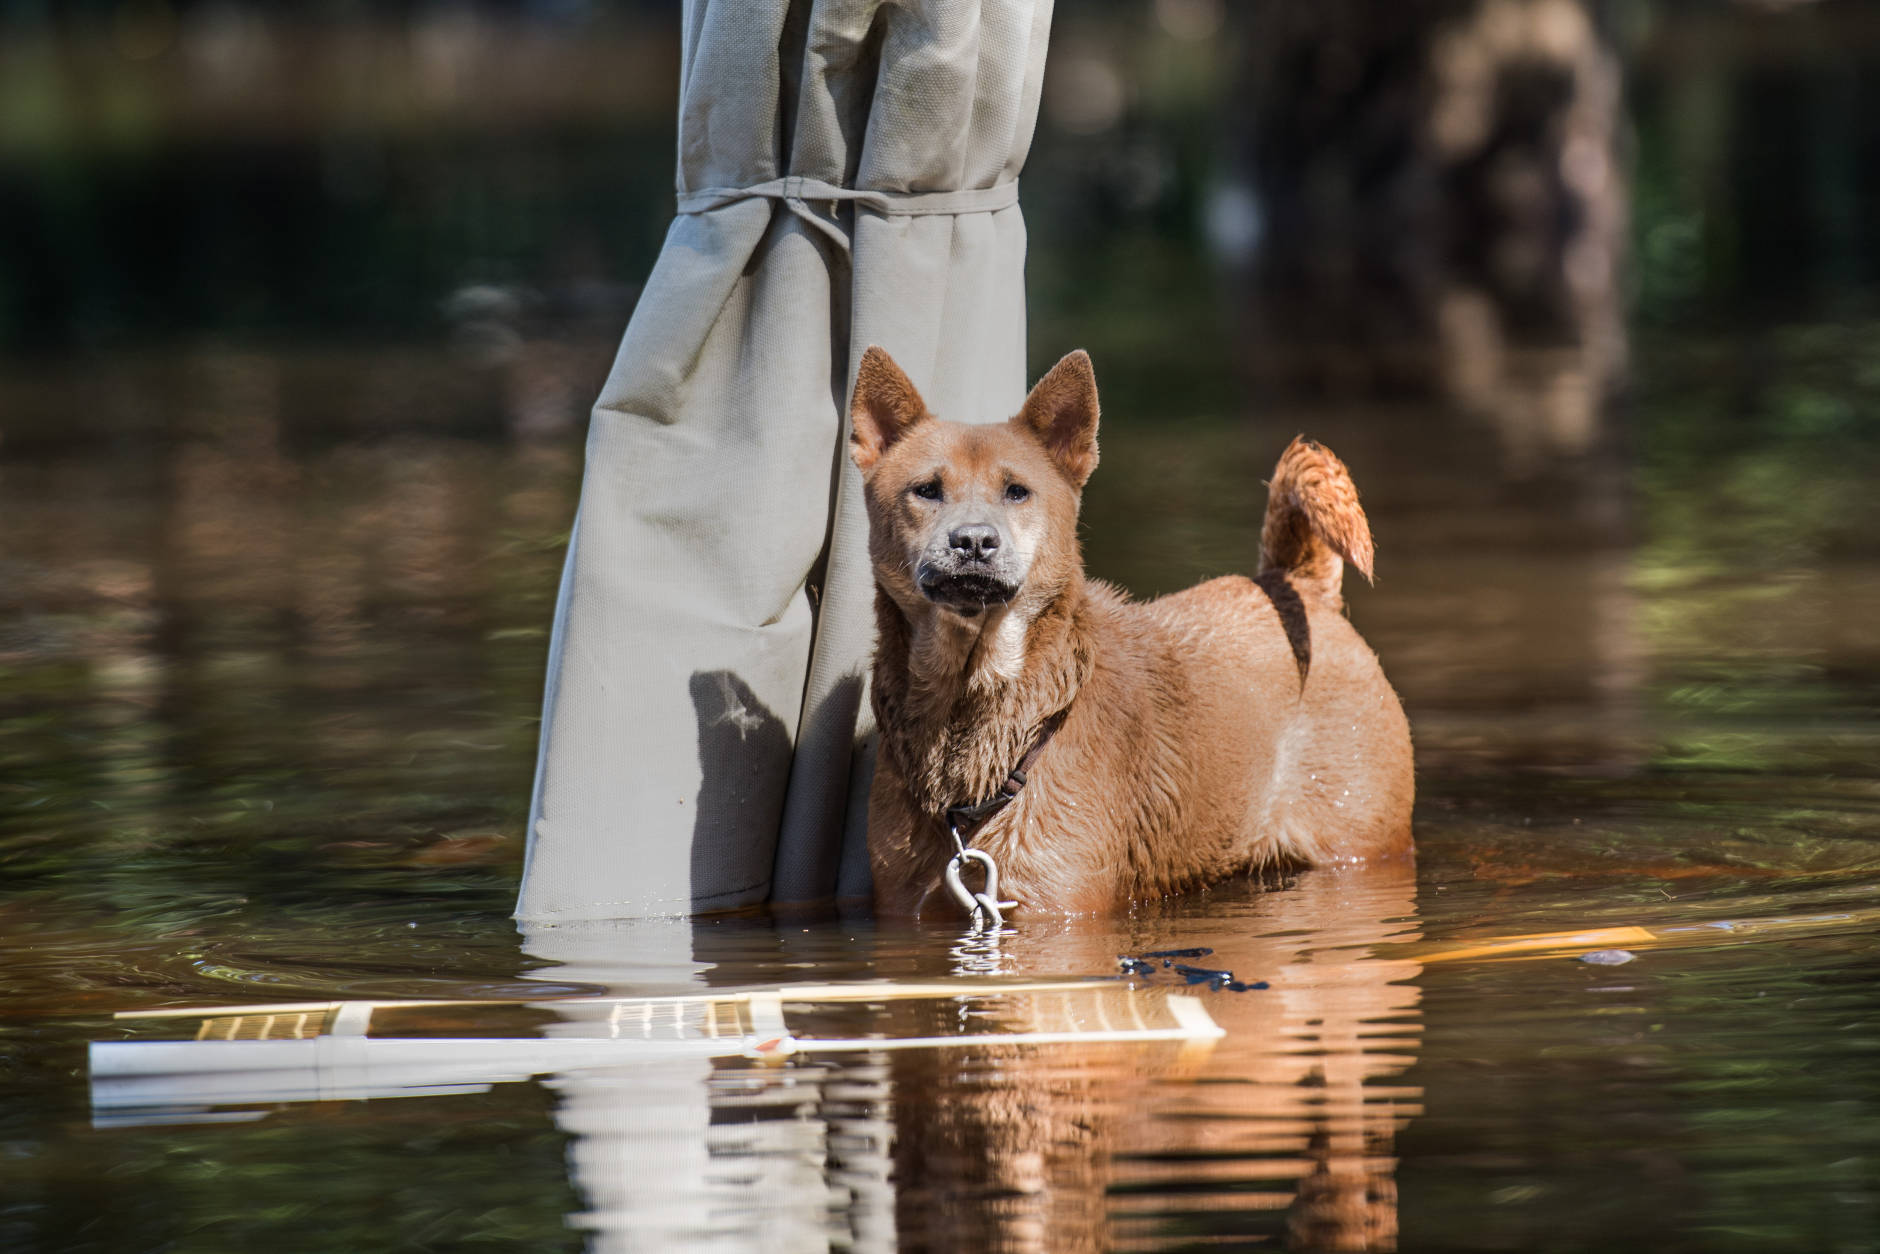 LUMBERTON, NC - OCTOBER 12: A dog stands on top of a patio table in floodwaters from the Lumber River on October 12, 2016 in Lumberton, North Carolina. Hurricane Matthew's heavy rains ended over the weekend, but flooding is still expected for days in North Carolina.(Photo by Sean Rayford/Getty Images)